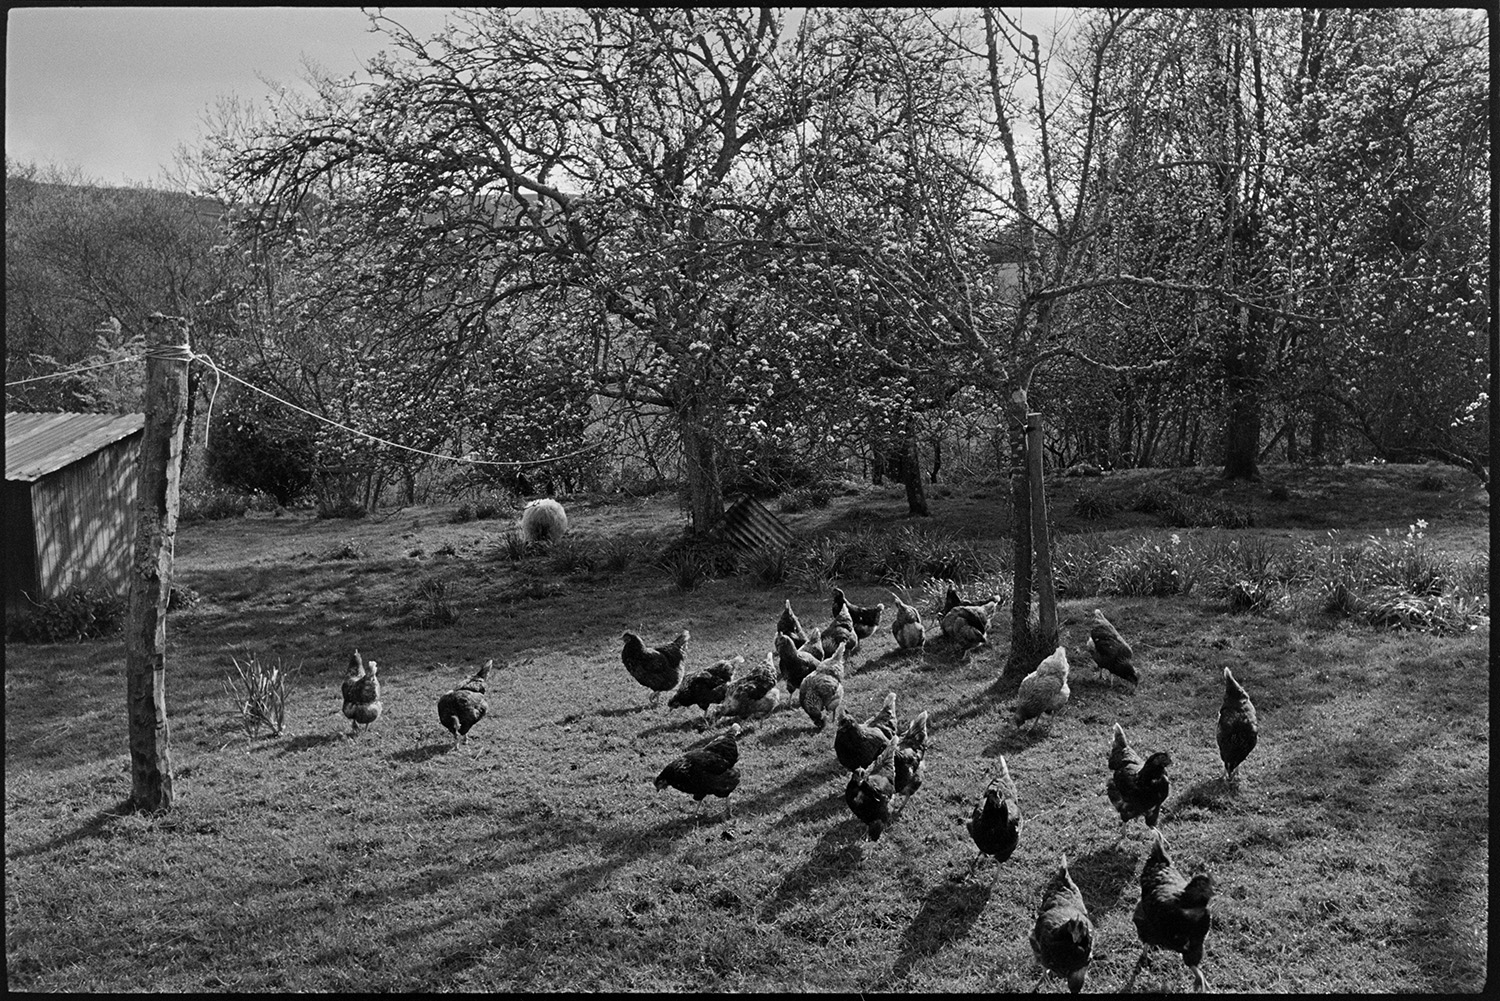 Farm orchard with sheep and chickens, poultry house.
[A flock of chickens on the grass at the edge of an orchard, with trees in blossom, at Harford, Landkey. A corrugated iron hen house is visible in the background.]